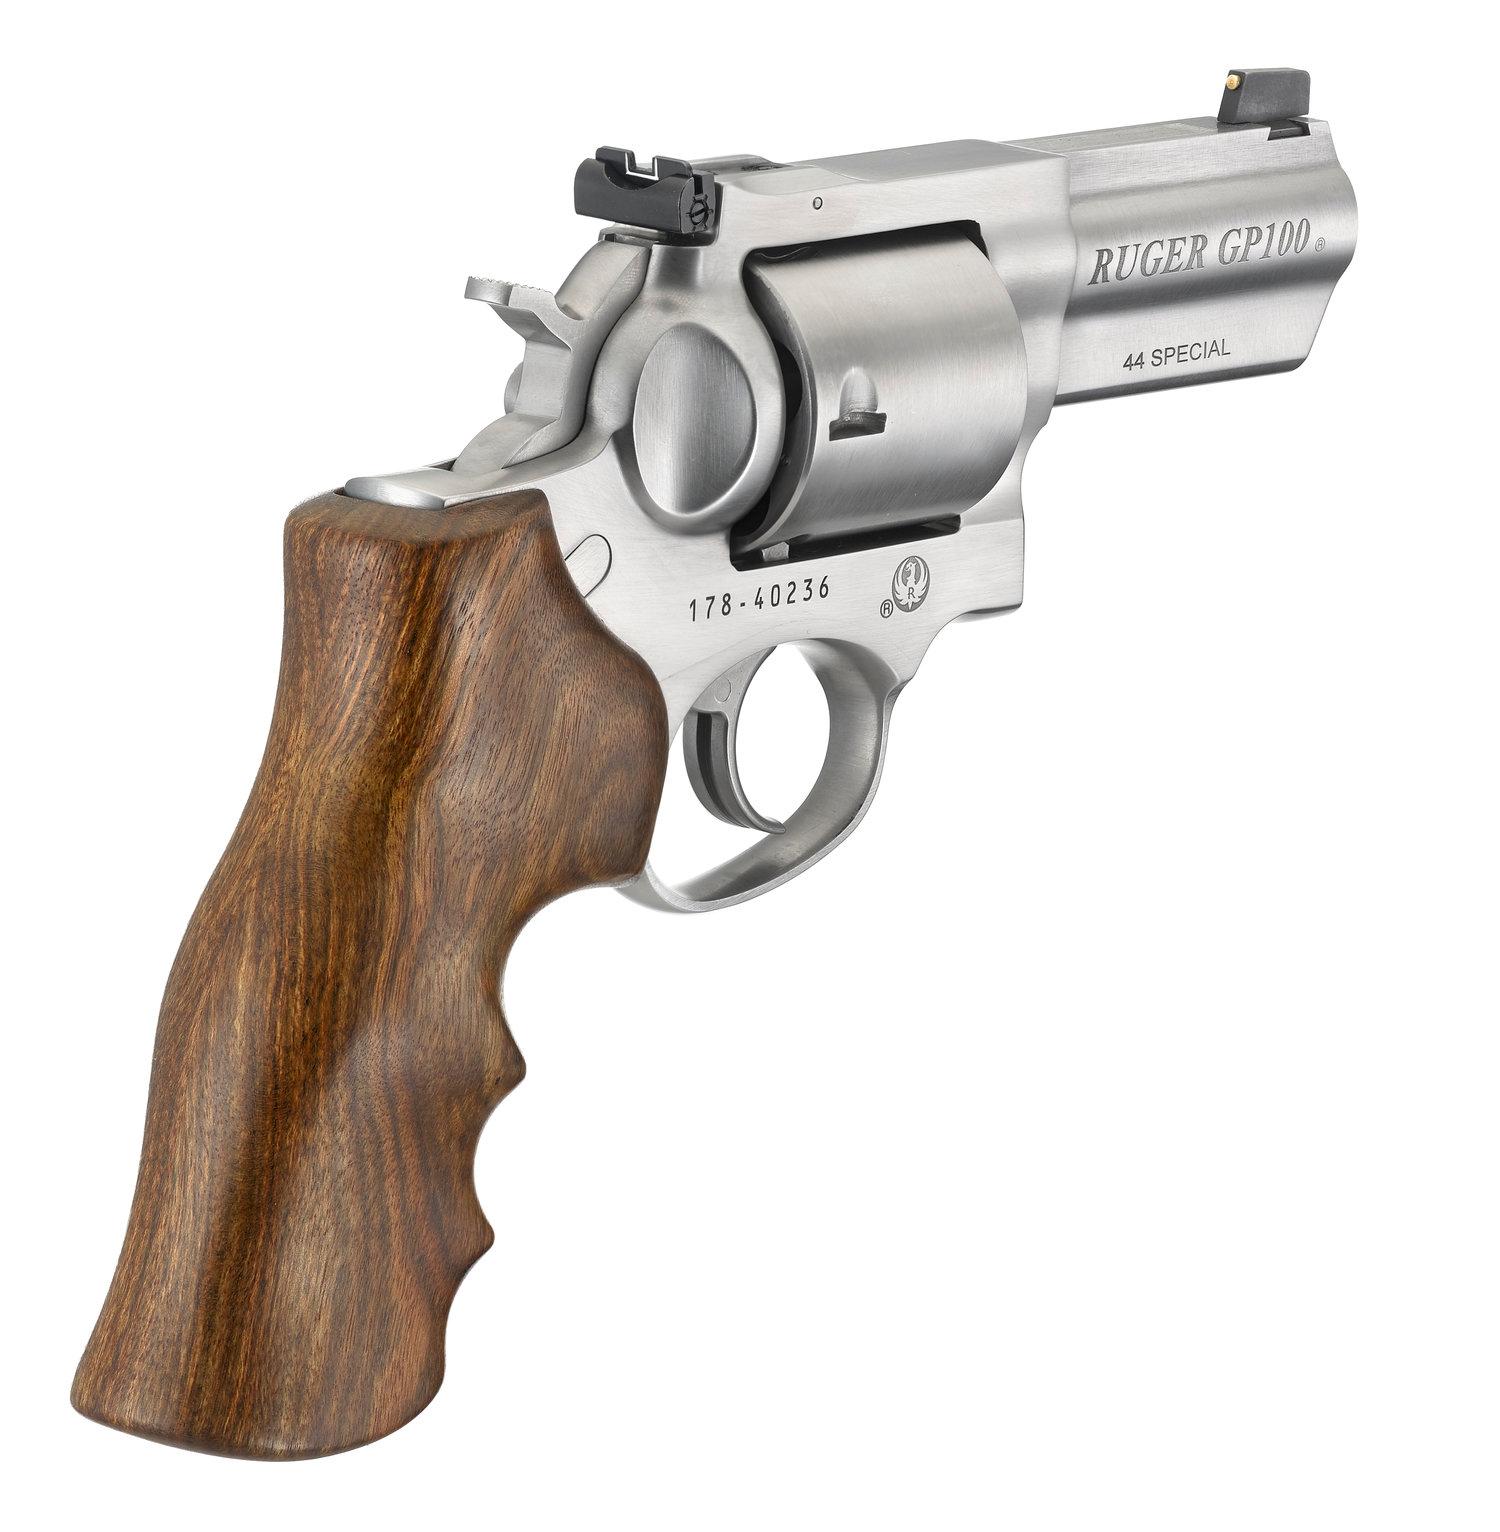 Ruger GP100 .44 SPECIAL Revolver, Stainless Steel, Wood Grip